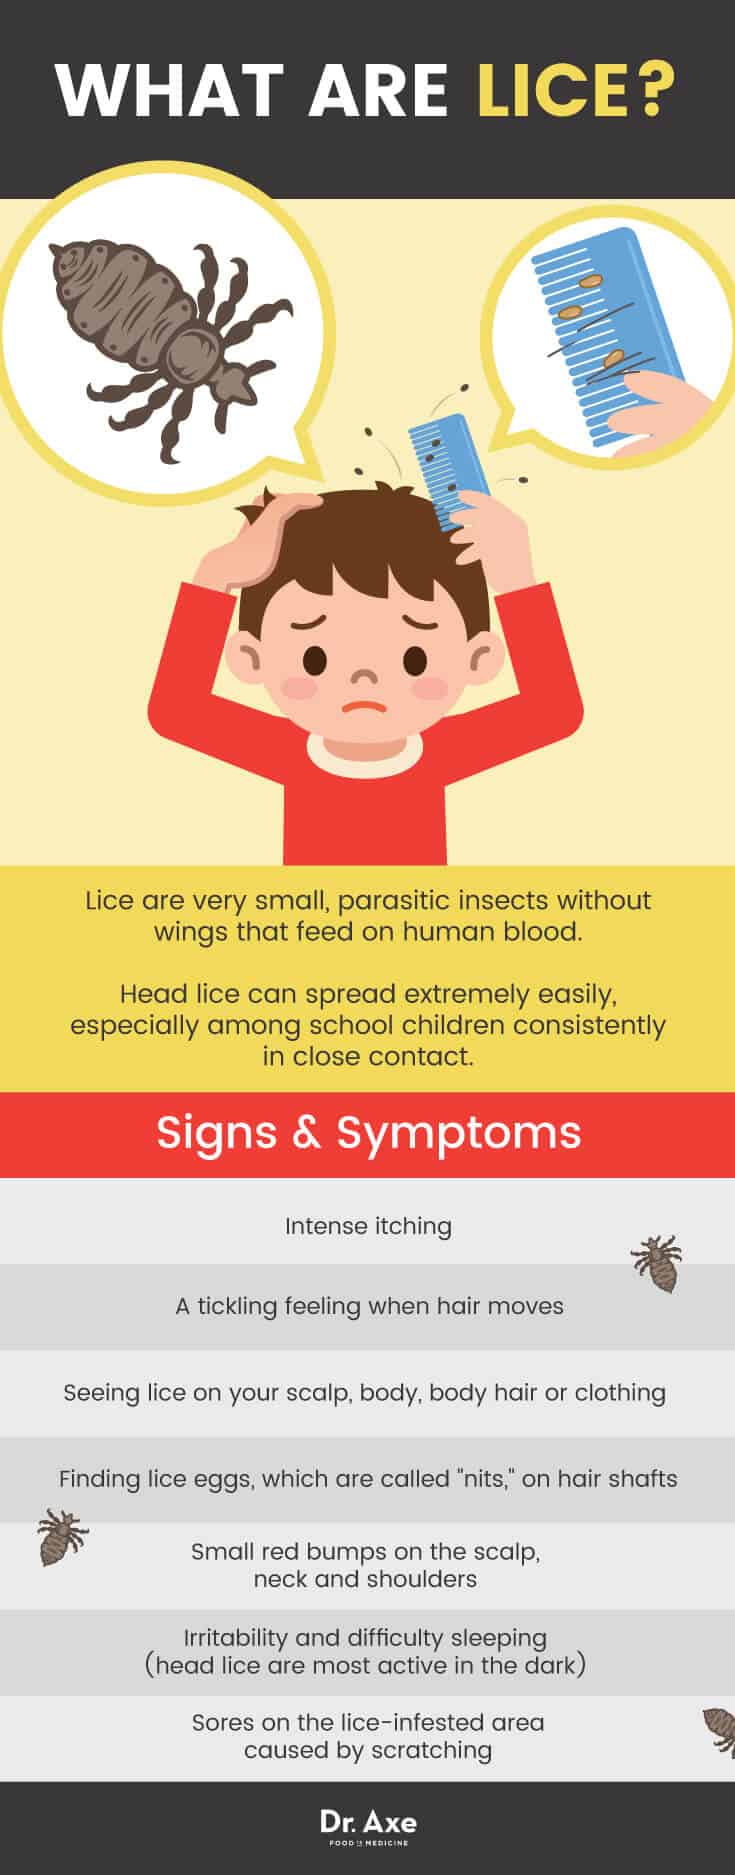 How to get rid of lice: signs & symptoms - Dr. Axe